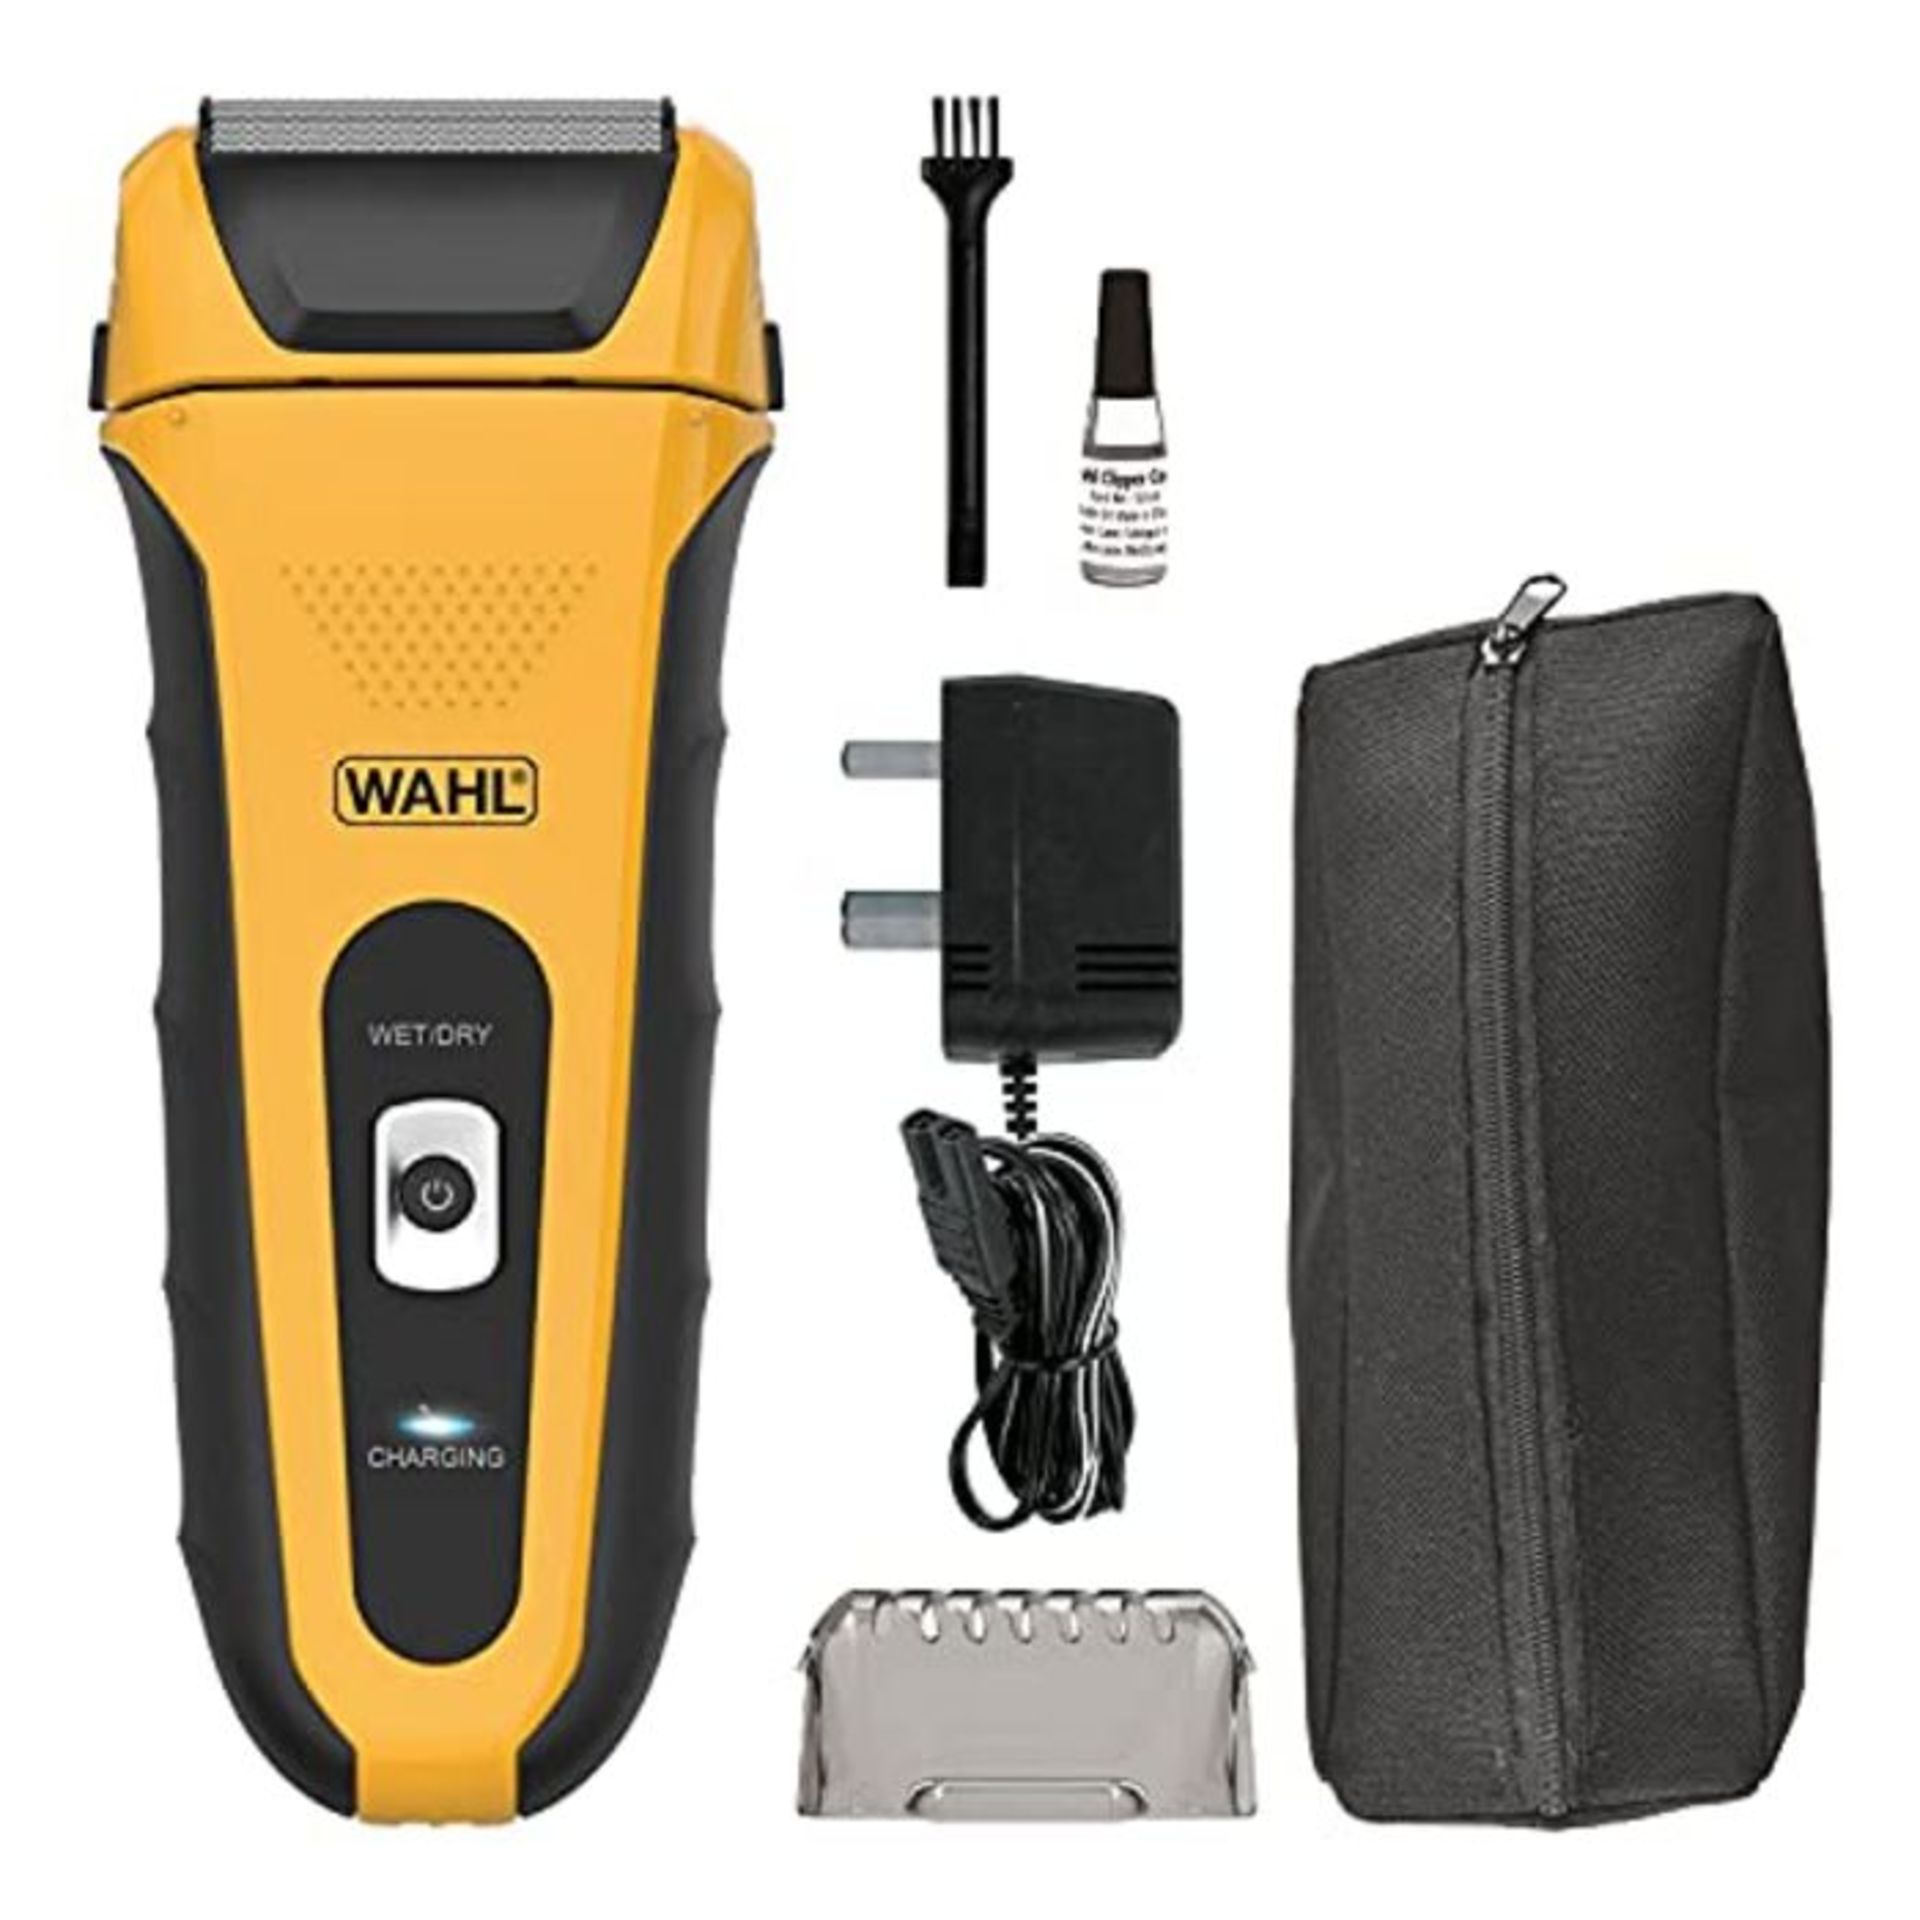 WAHL Electric Razor/Shaver Lifeproof Foil Shaver, Anti-Shock Case, Bright Yellow, Full